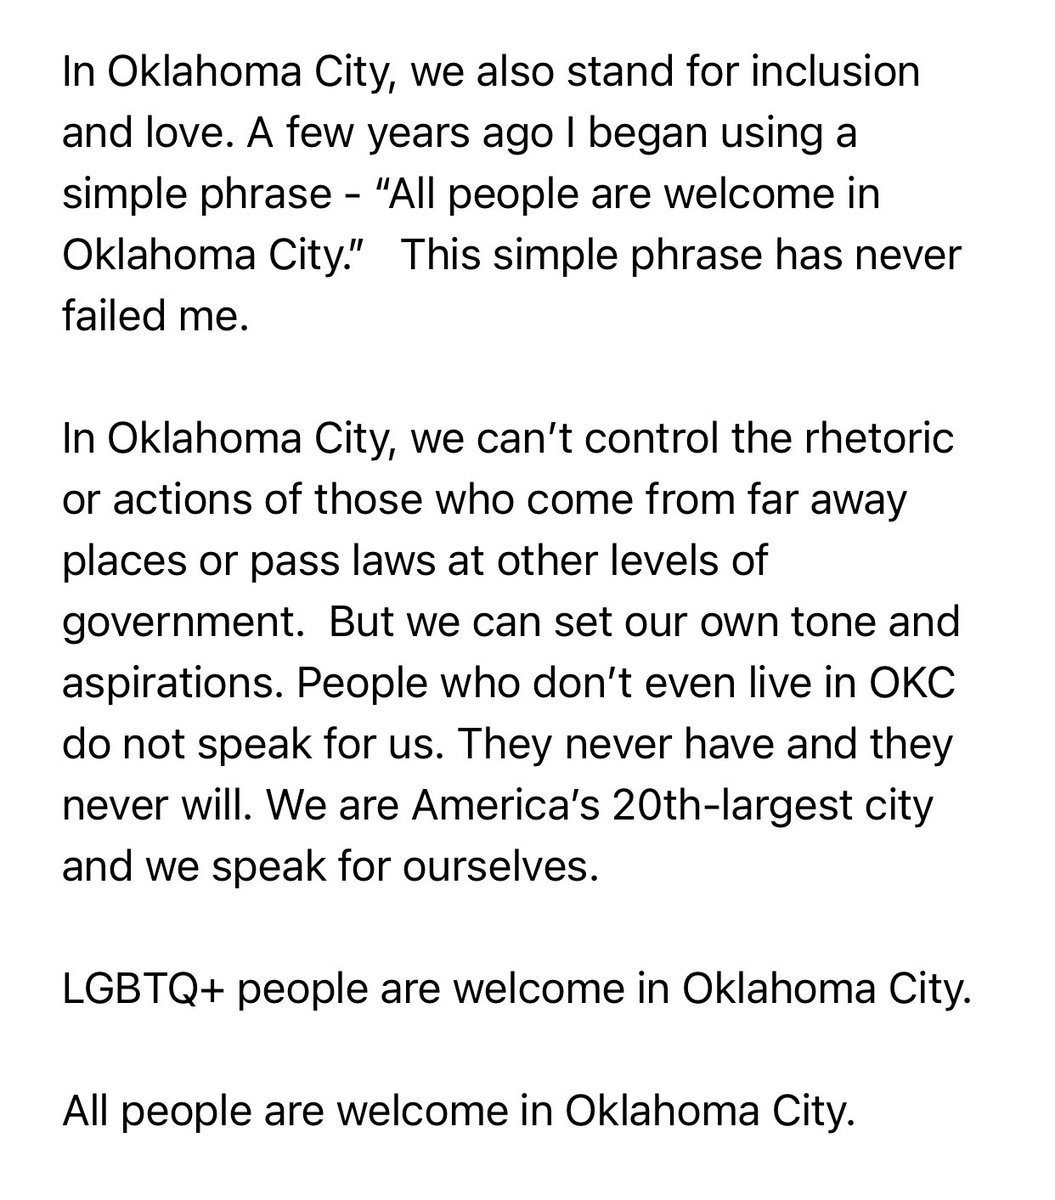 All people are welcome in Oklahoma City. #1OKC